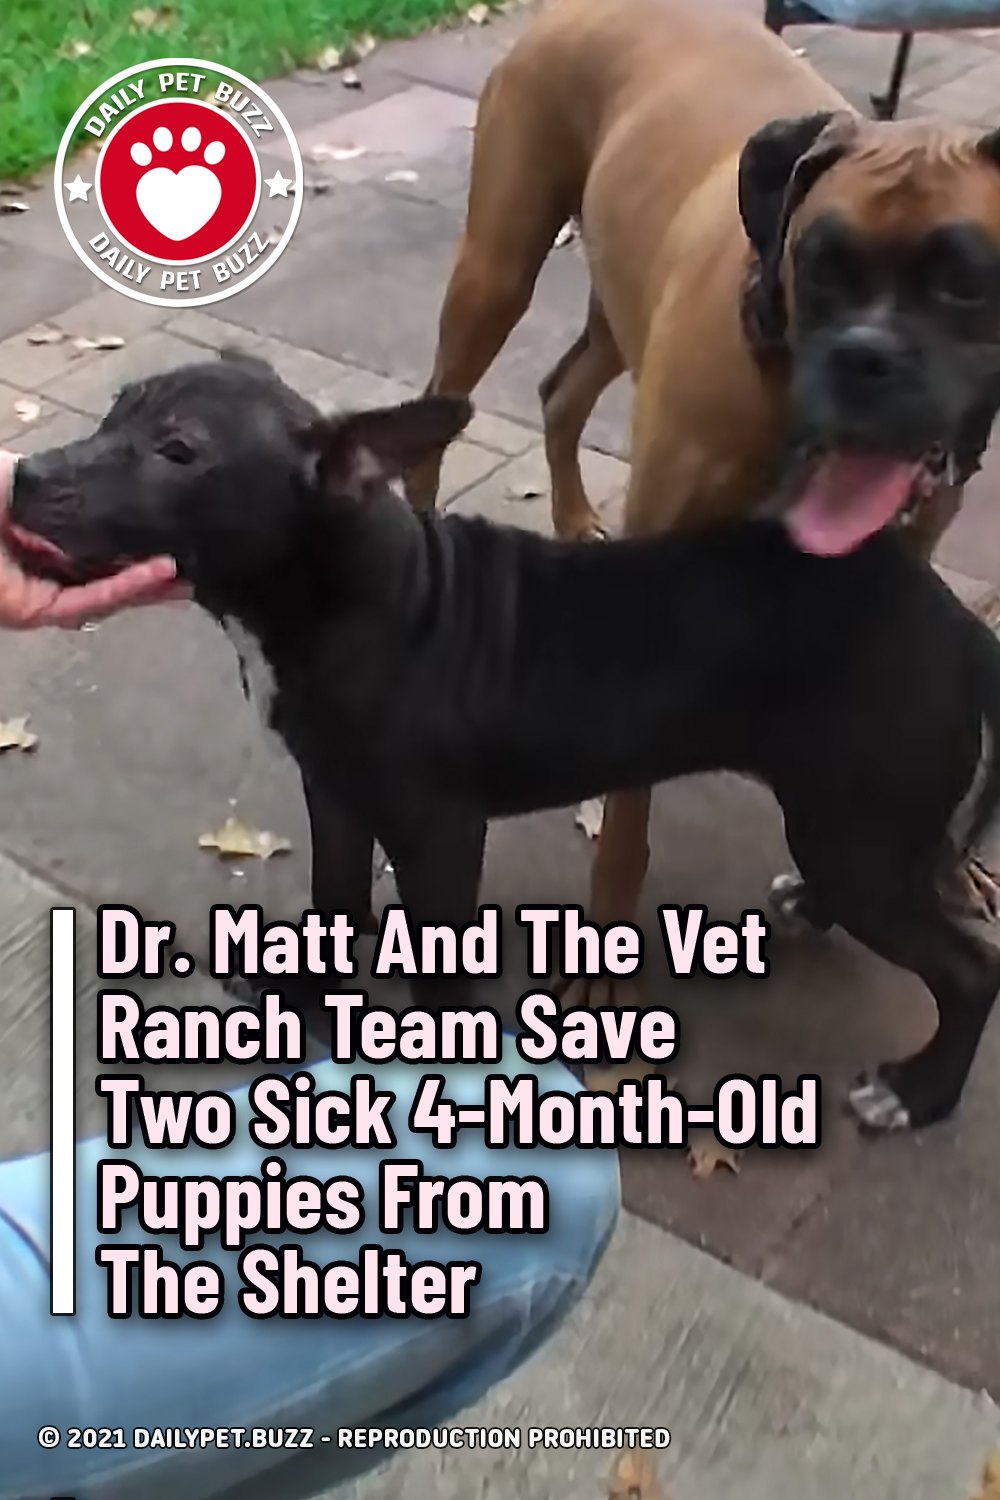 Dr. Matt And The Vet Ranch Team Save Two Sick 4-Month-Old Puppies From The Shelter